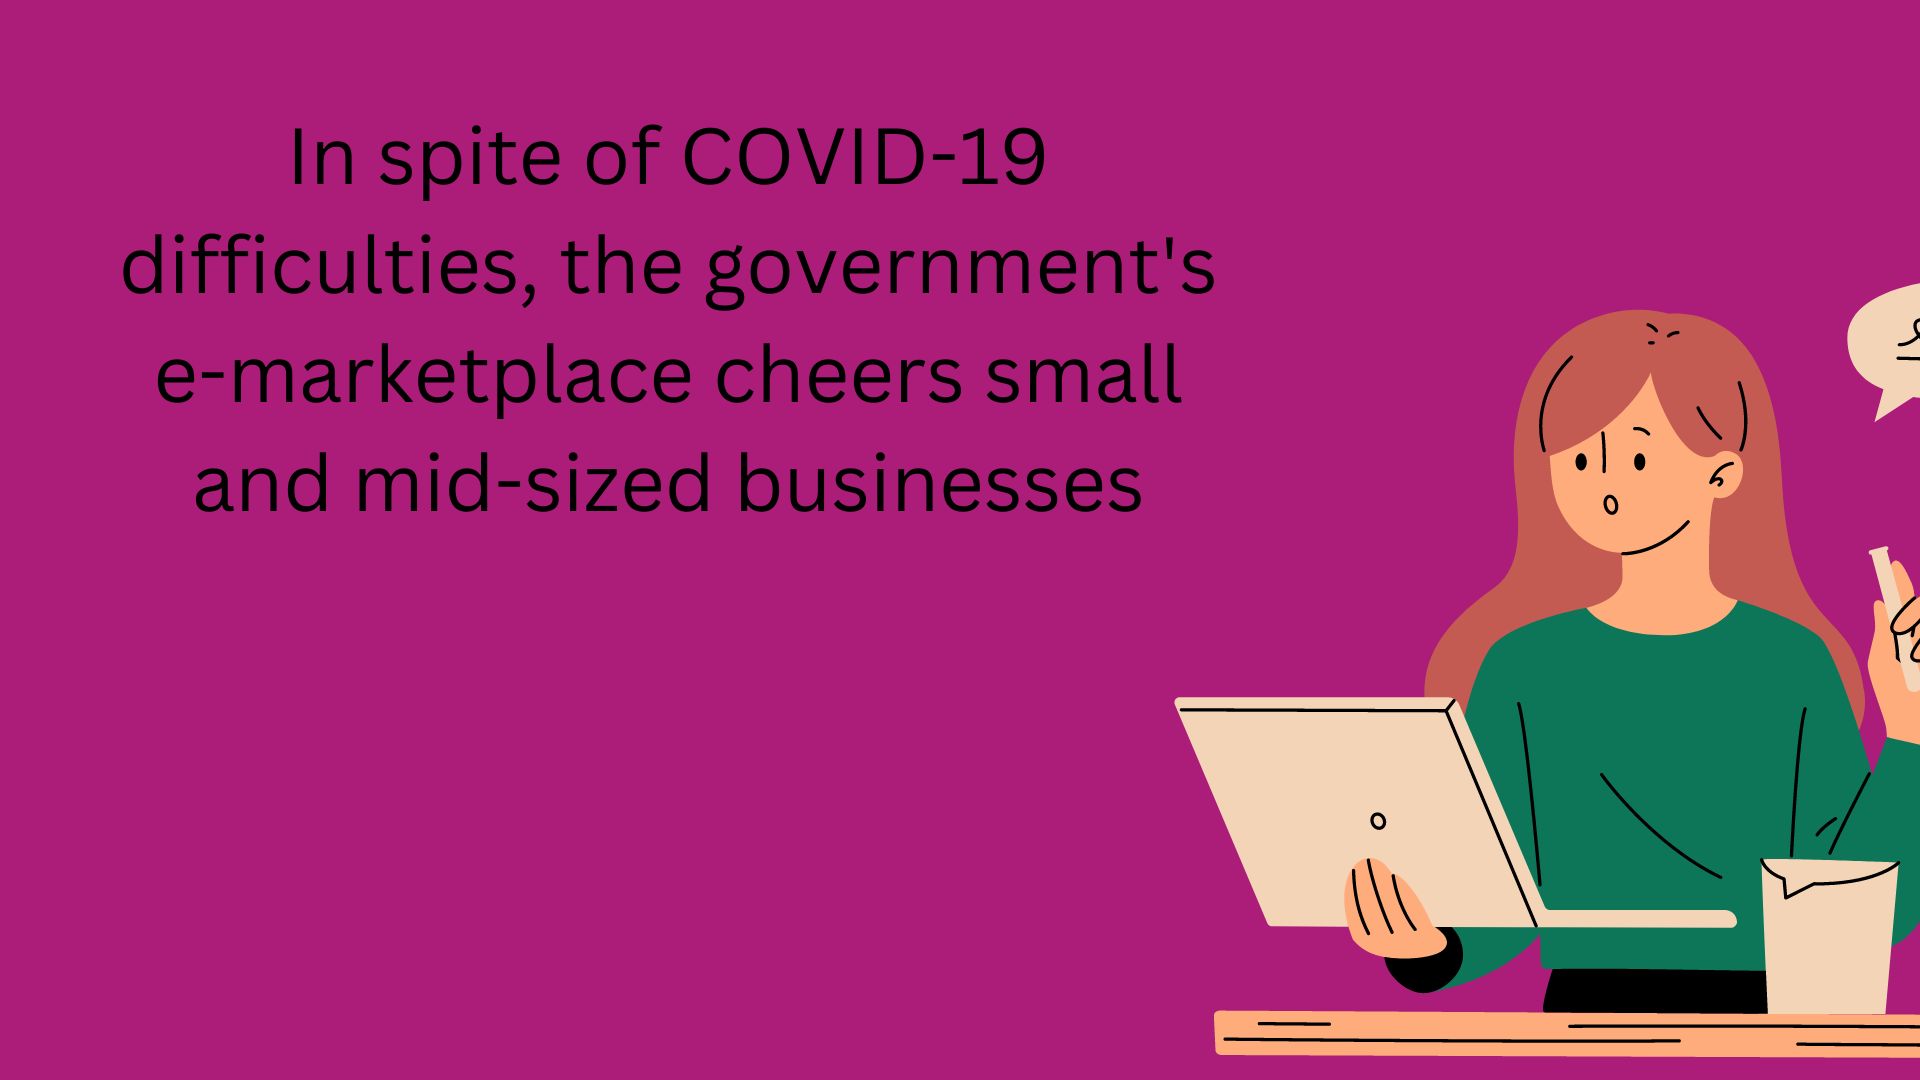 In spite of COVID-19 difficulties, the government's e-marketplace cheers small and mid-sized businesses